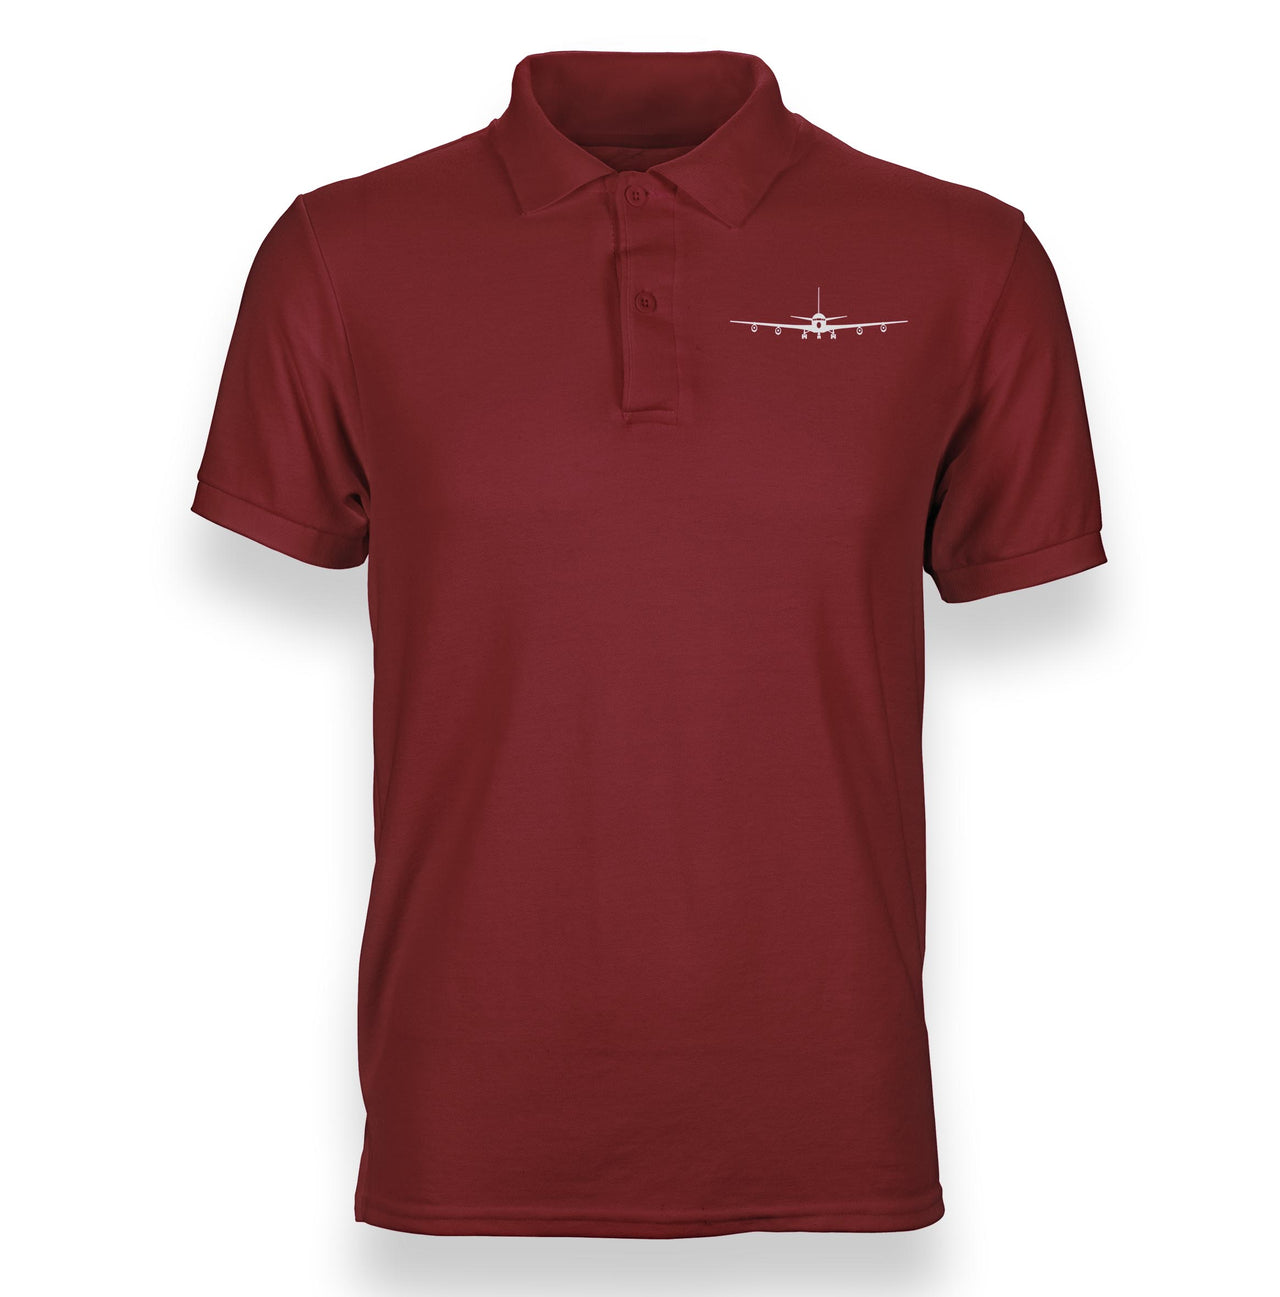 Boeing 707 Silhouette Designed Polo T-Shirts